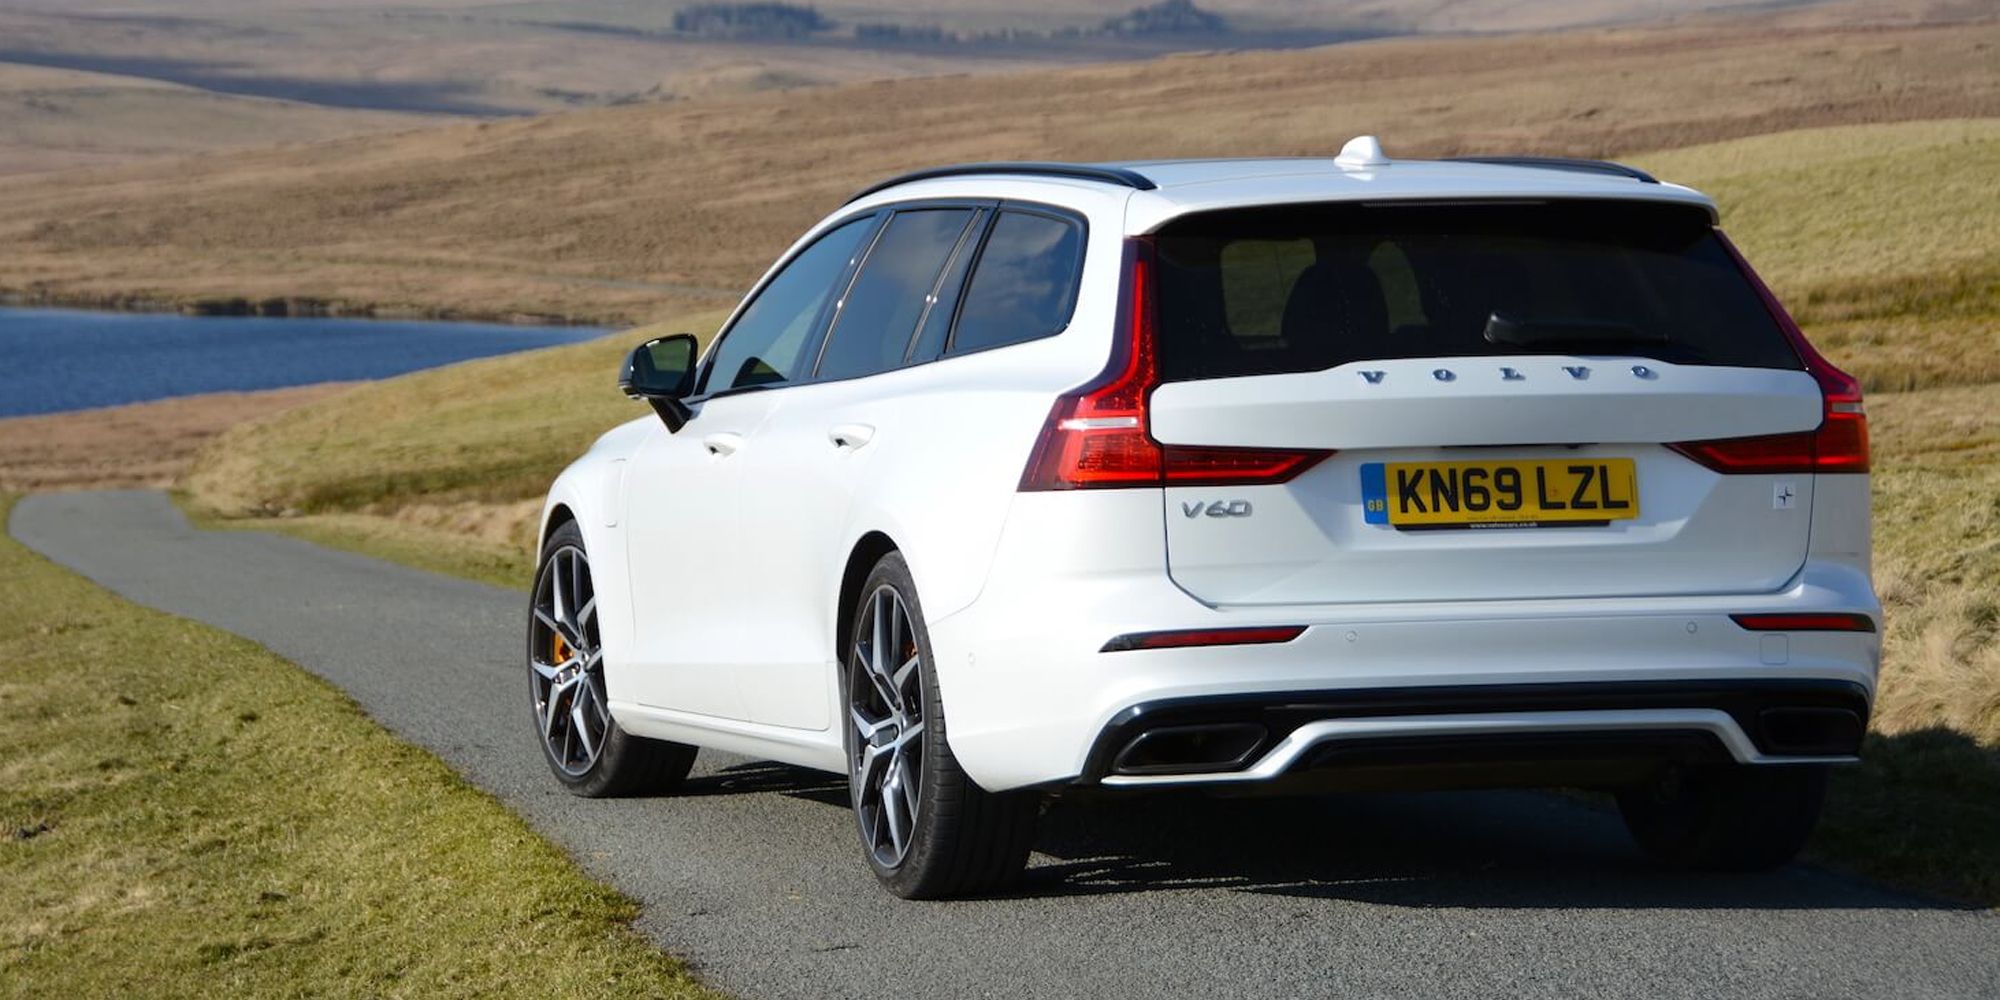 The rear of the V60 PE